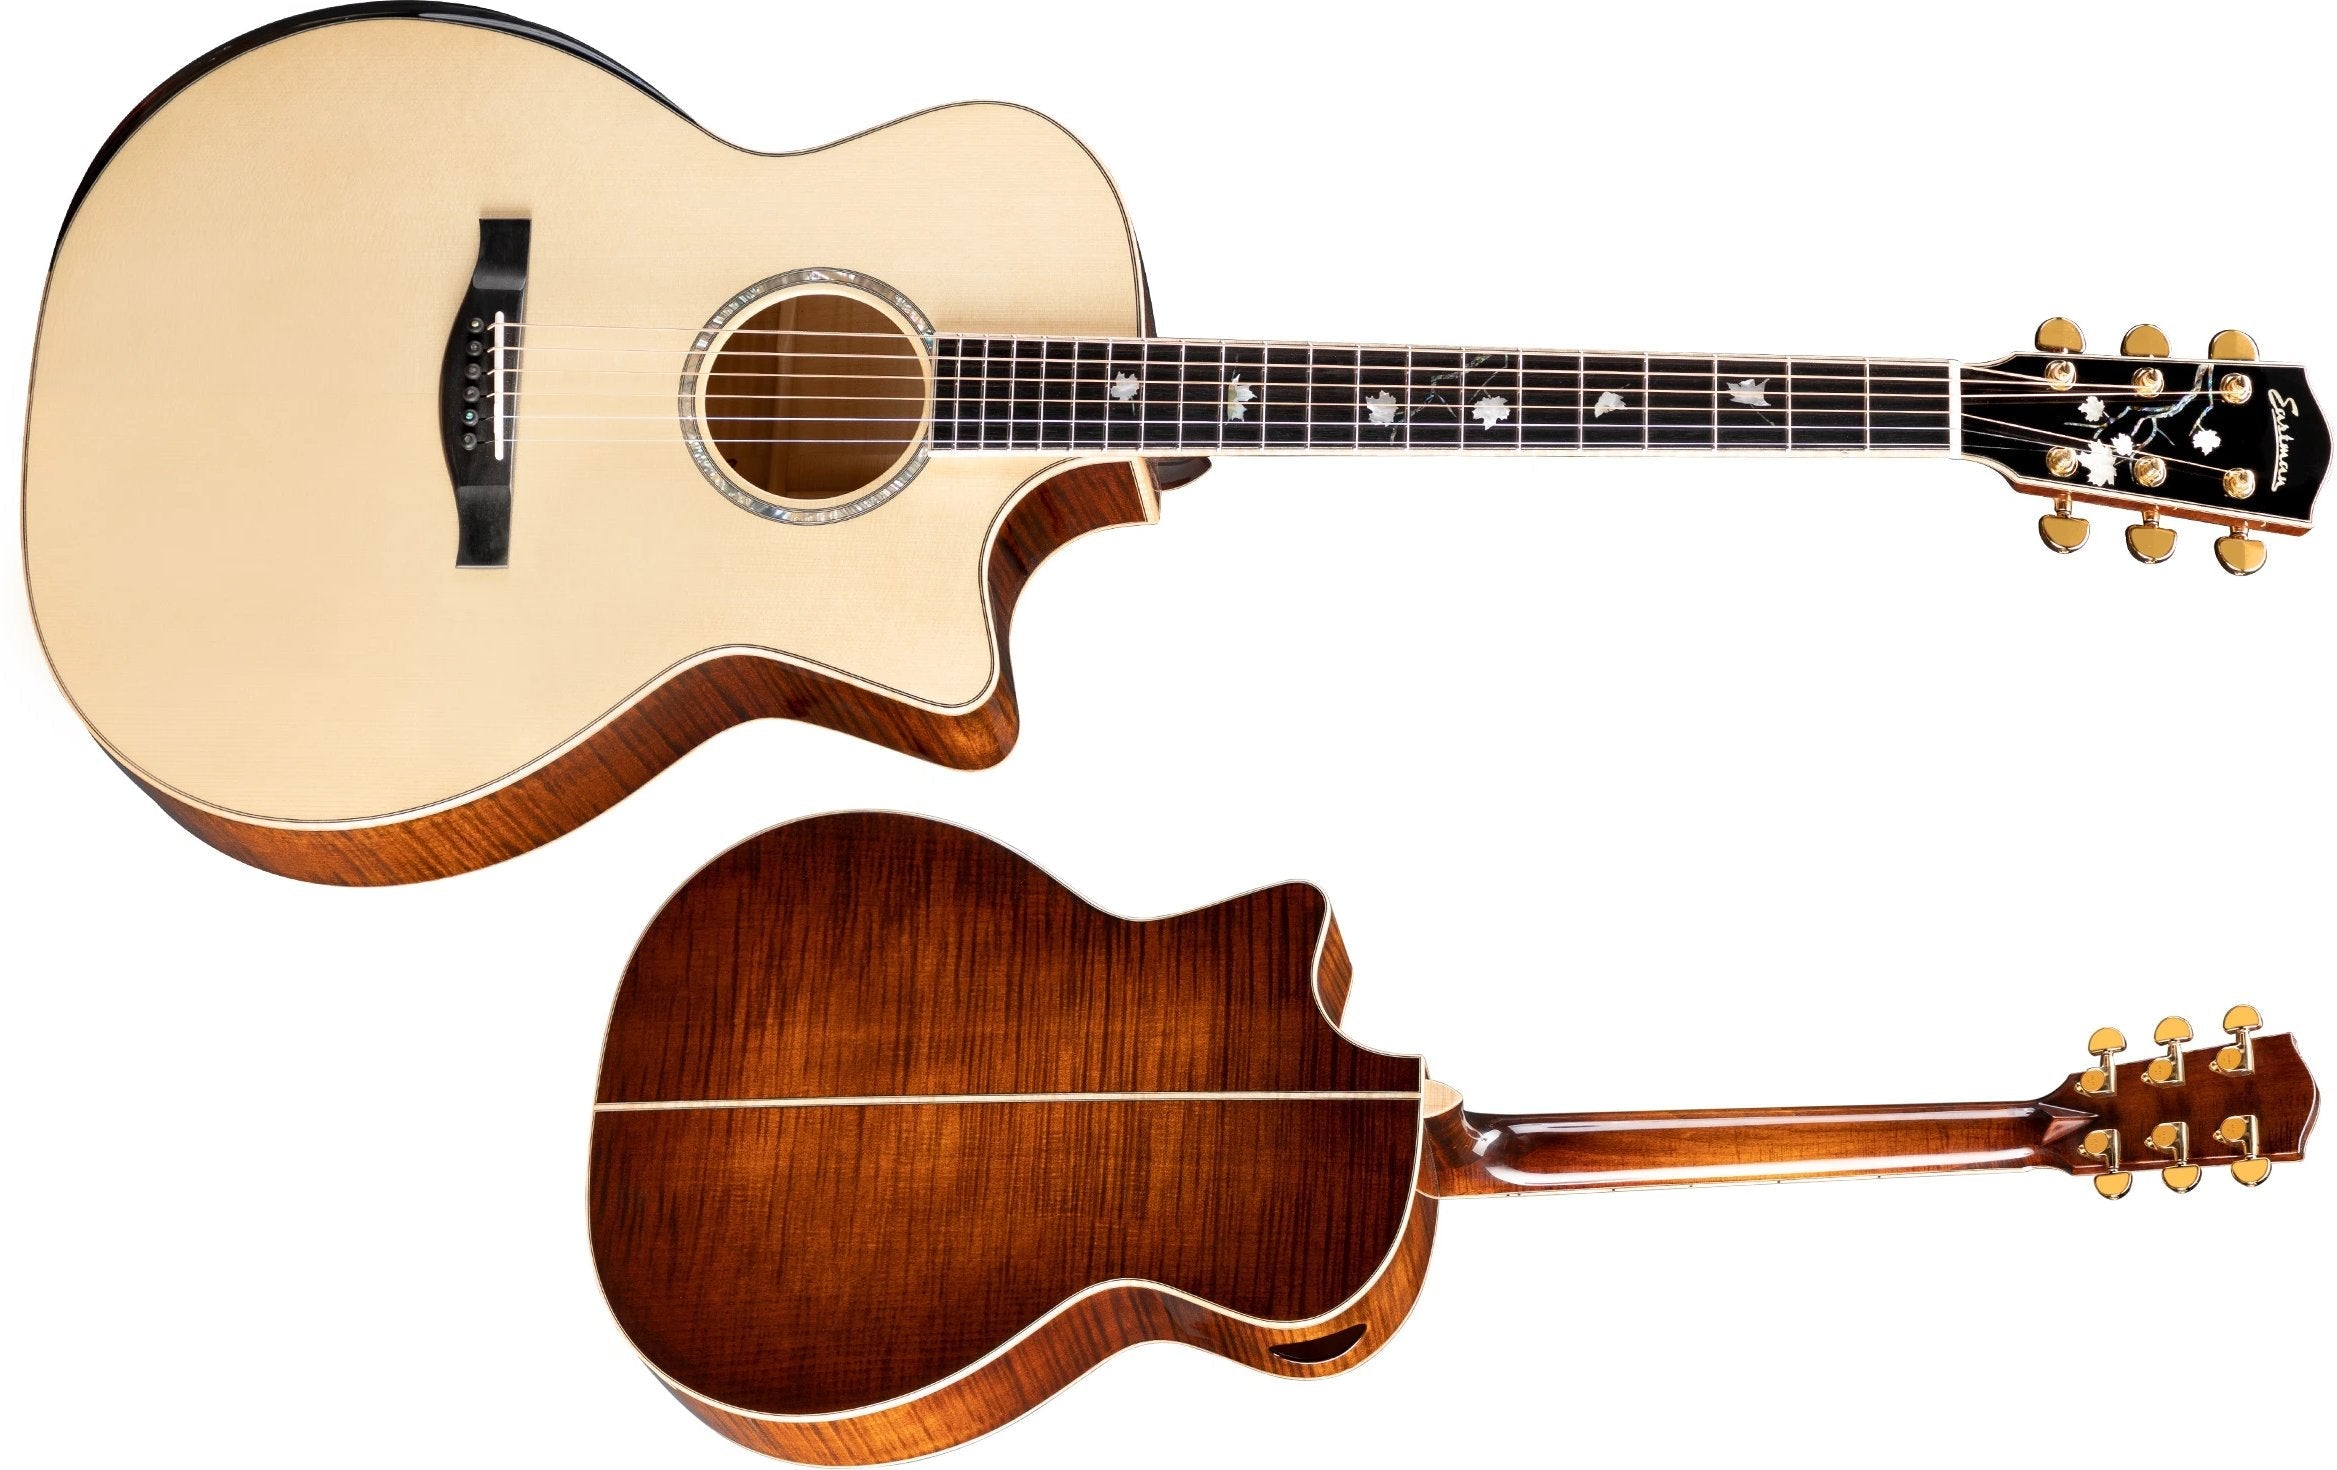 Eastman AC622CE Grand Auditorium w/ cutaway, Electro Acoustic Guitar for sale at Richards Guitars.